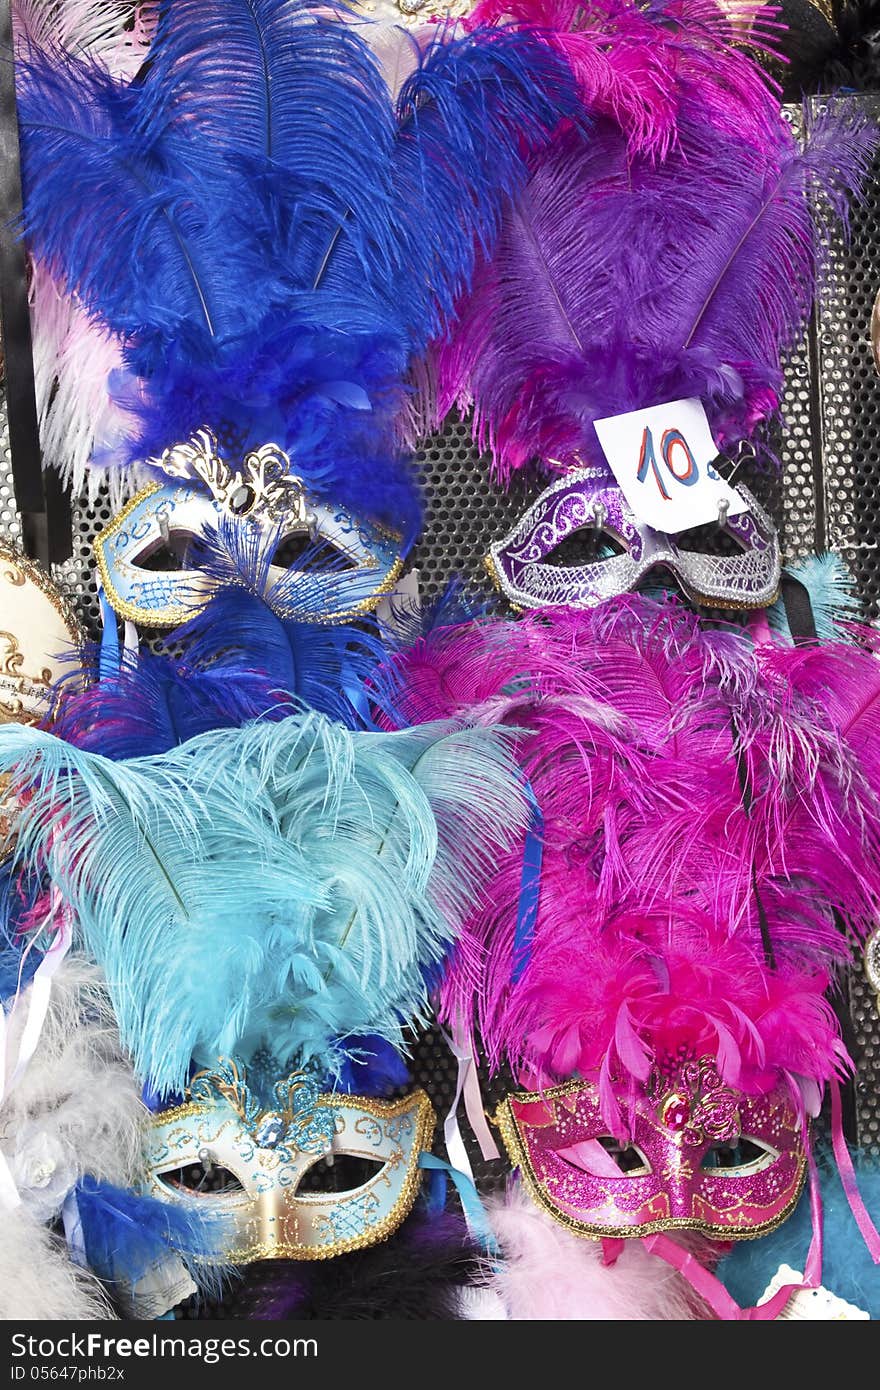 Masks exposed at market carnival of venice. Masks exposed at market carnival of venice